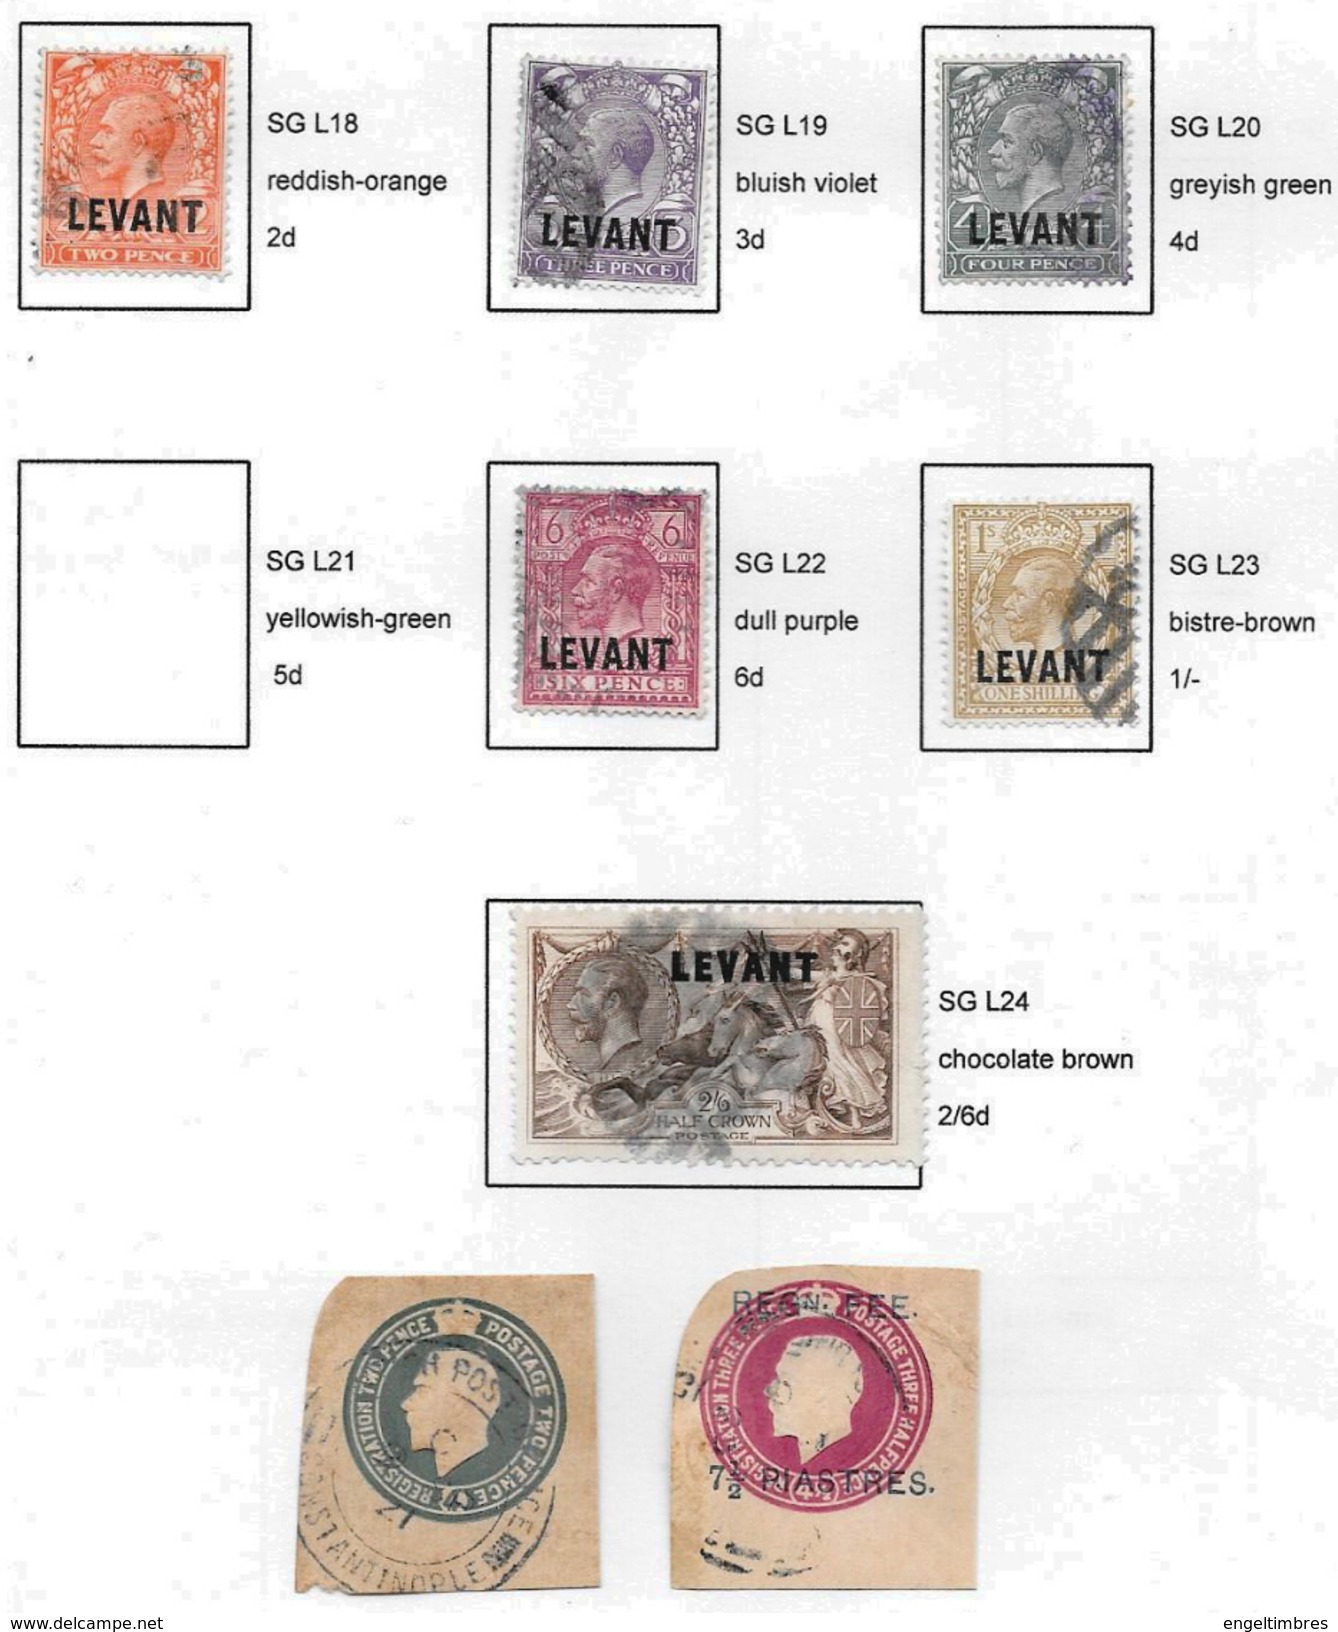 British LEVANT - 1921  George 5th  Overprinted  "LEVANT" SG L18 - L20 And L22 - L24  (6 Stamps) + Extras - USED - Britisch-Levant